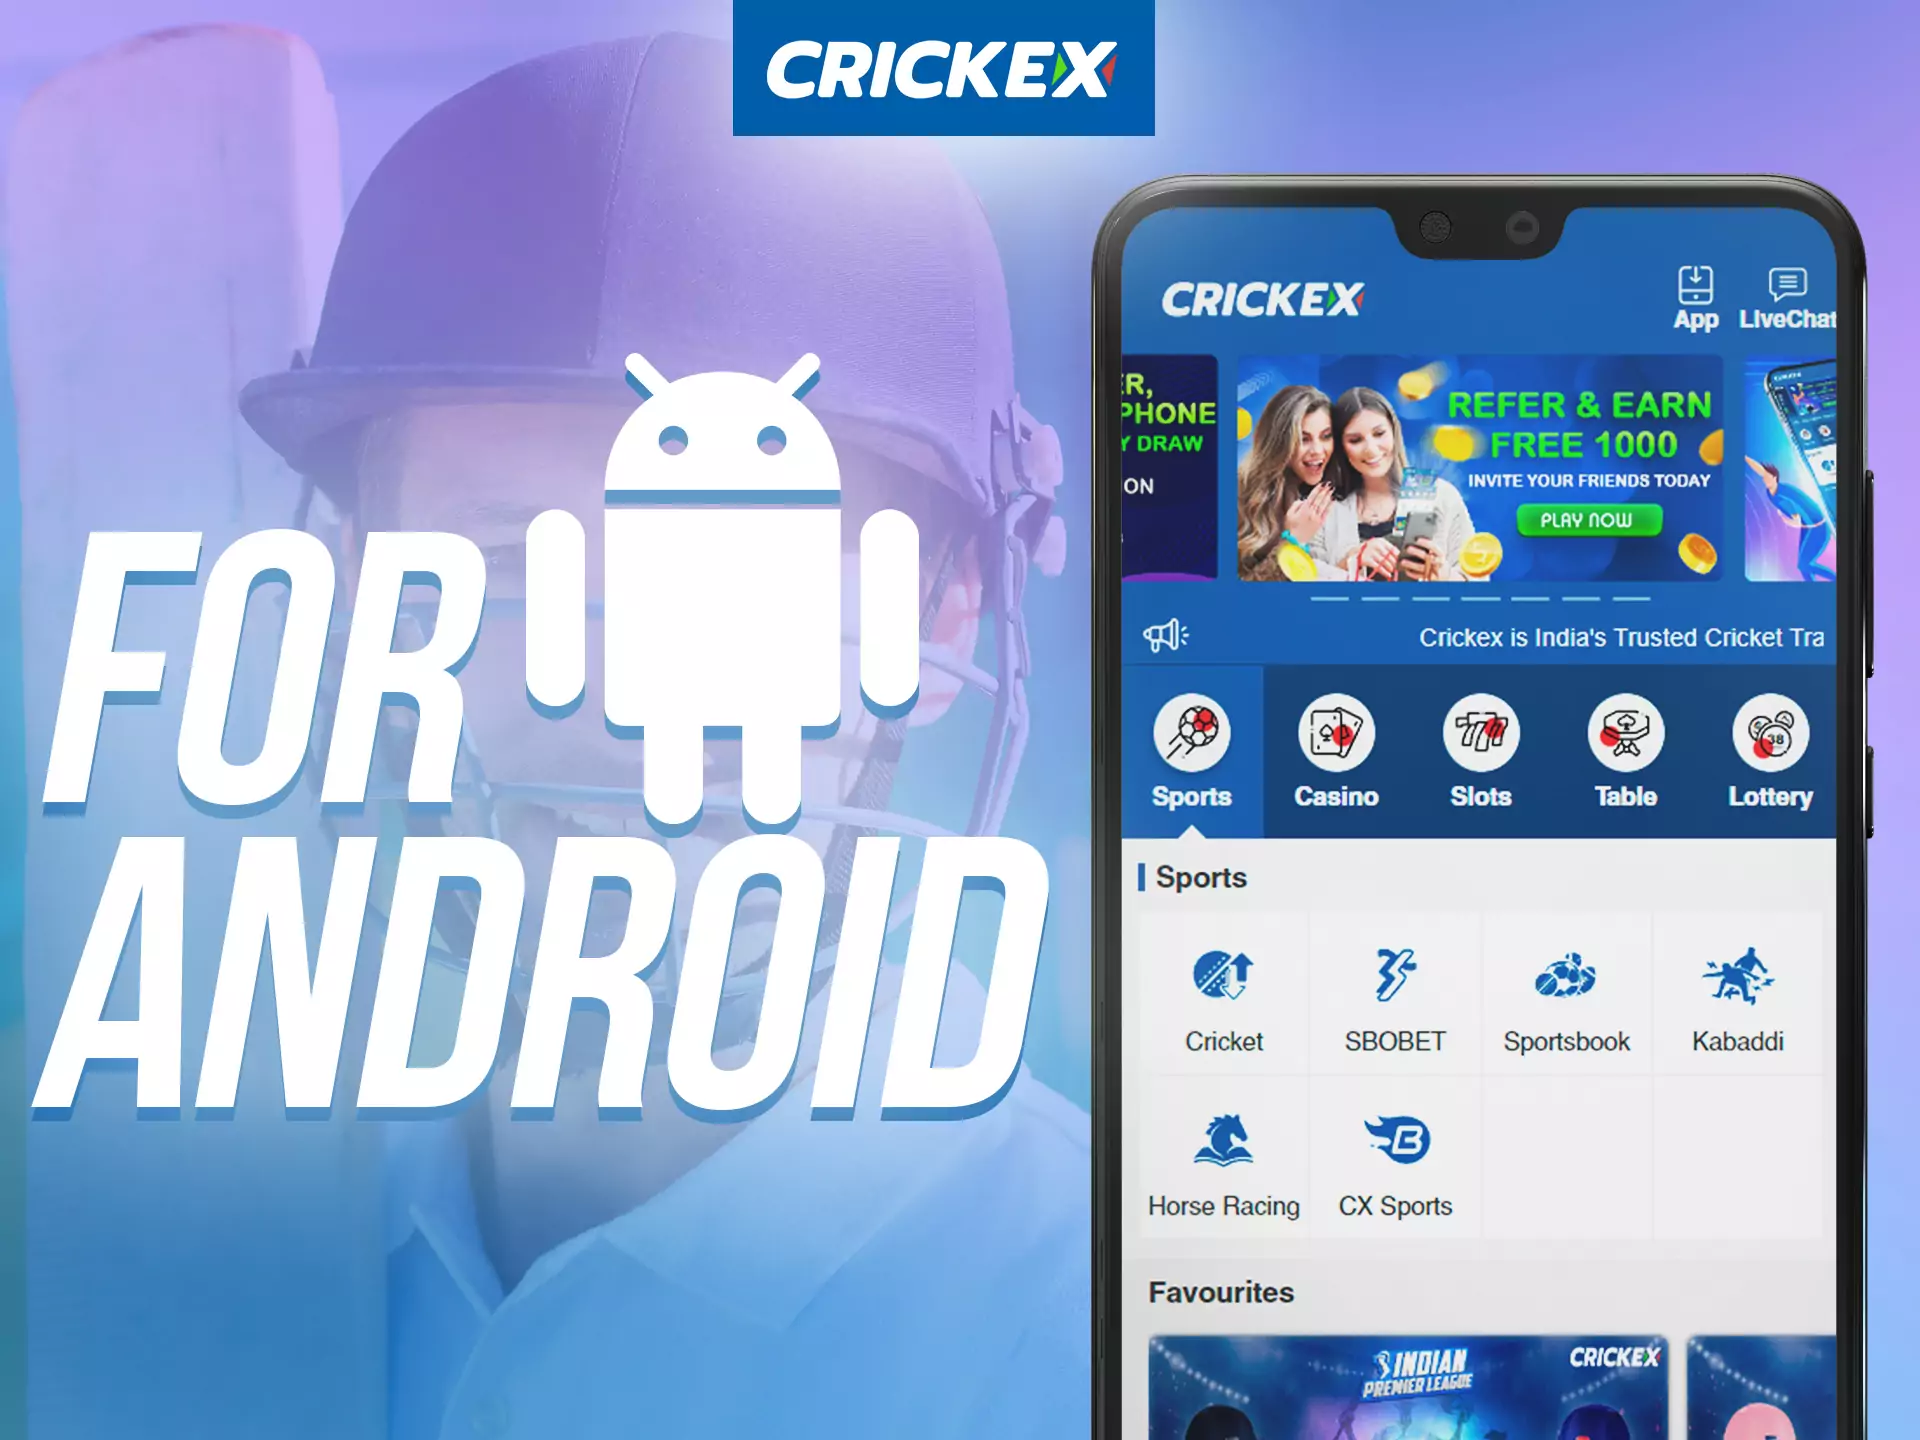 Install the Crickex app on your Android device.